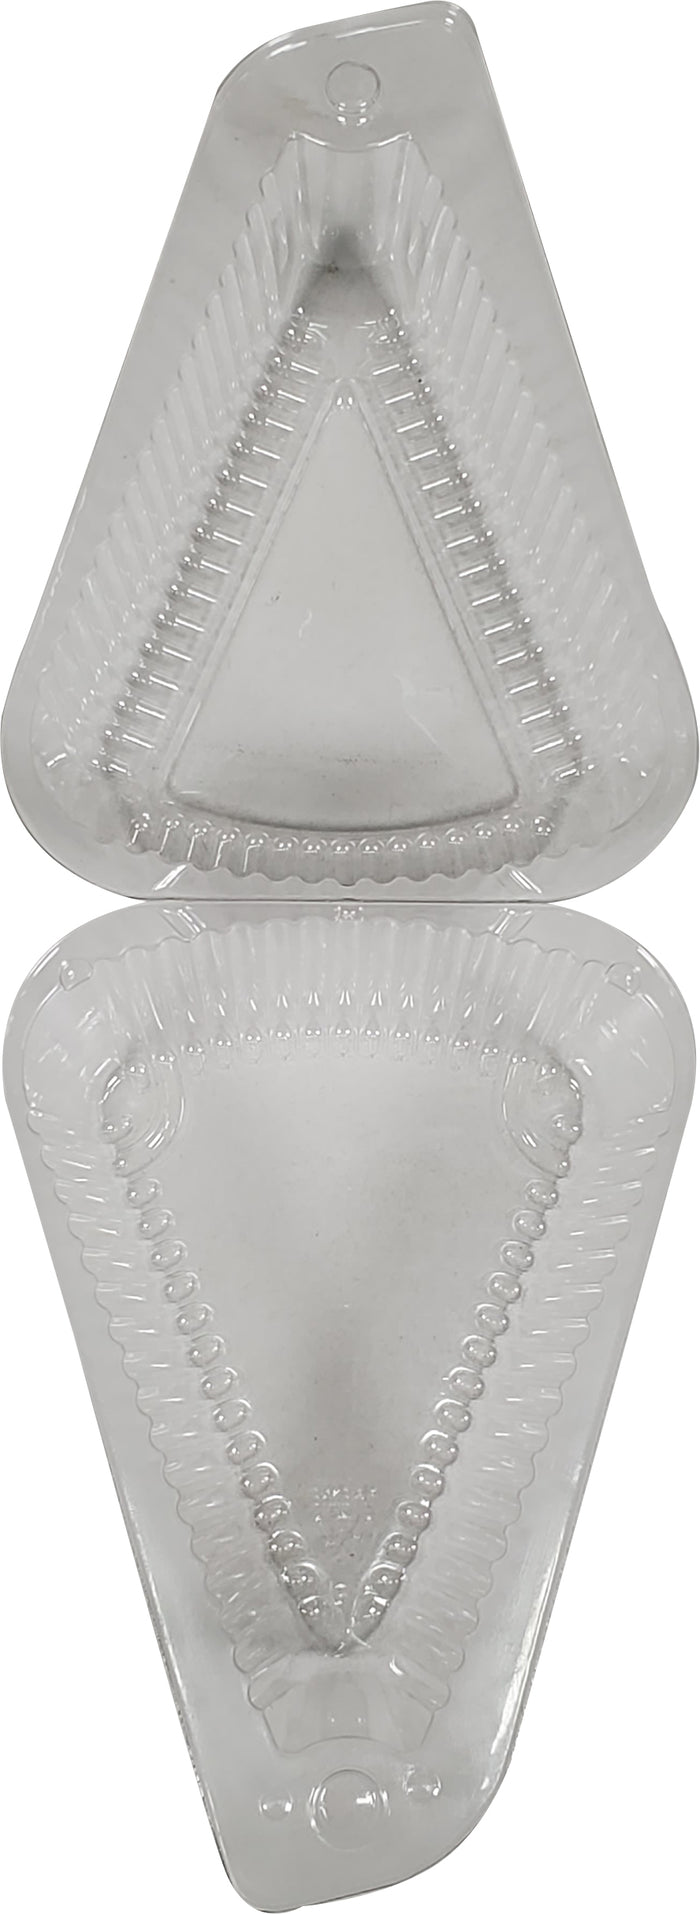 Pie Slice Container - Extra Deep - Clear Hinged - 503230